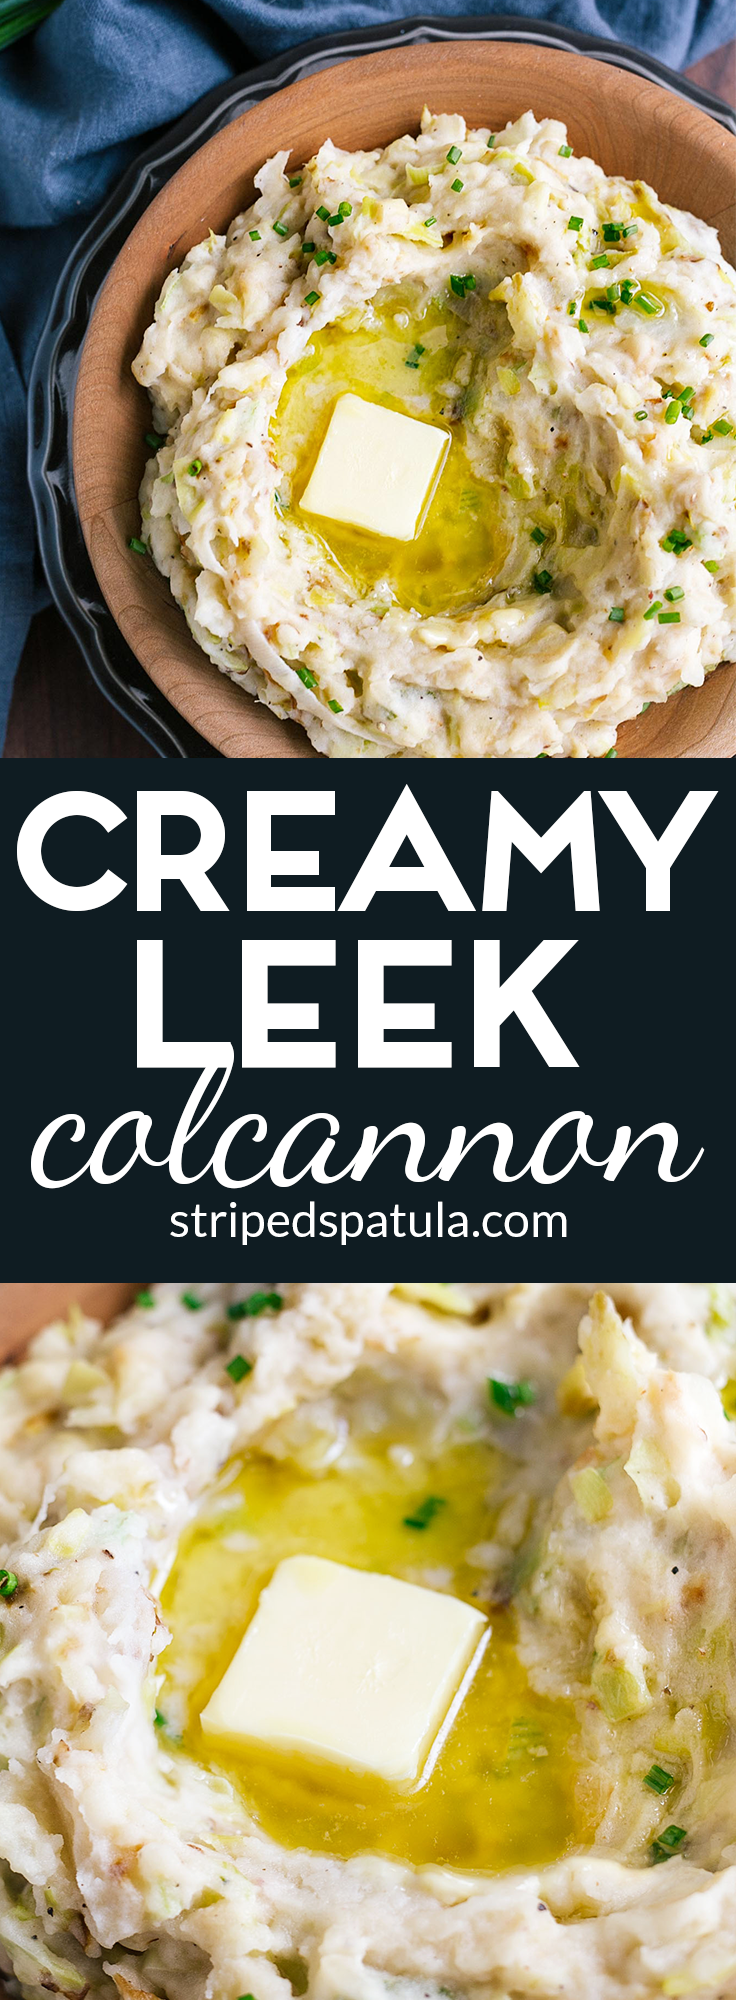 Creamy Leek and Cabbage Colcannon -   25 savoy cabbage recipes
 ideas